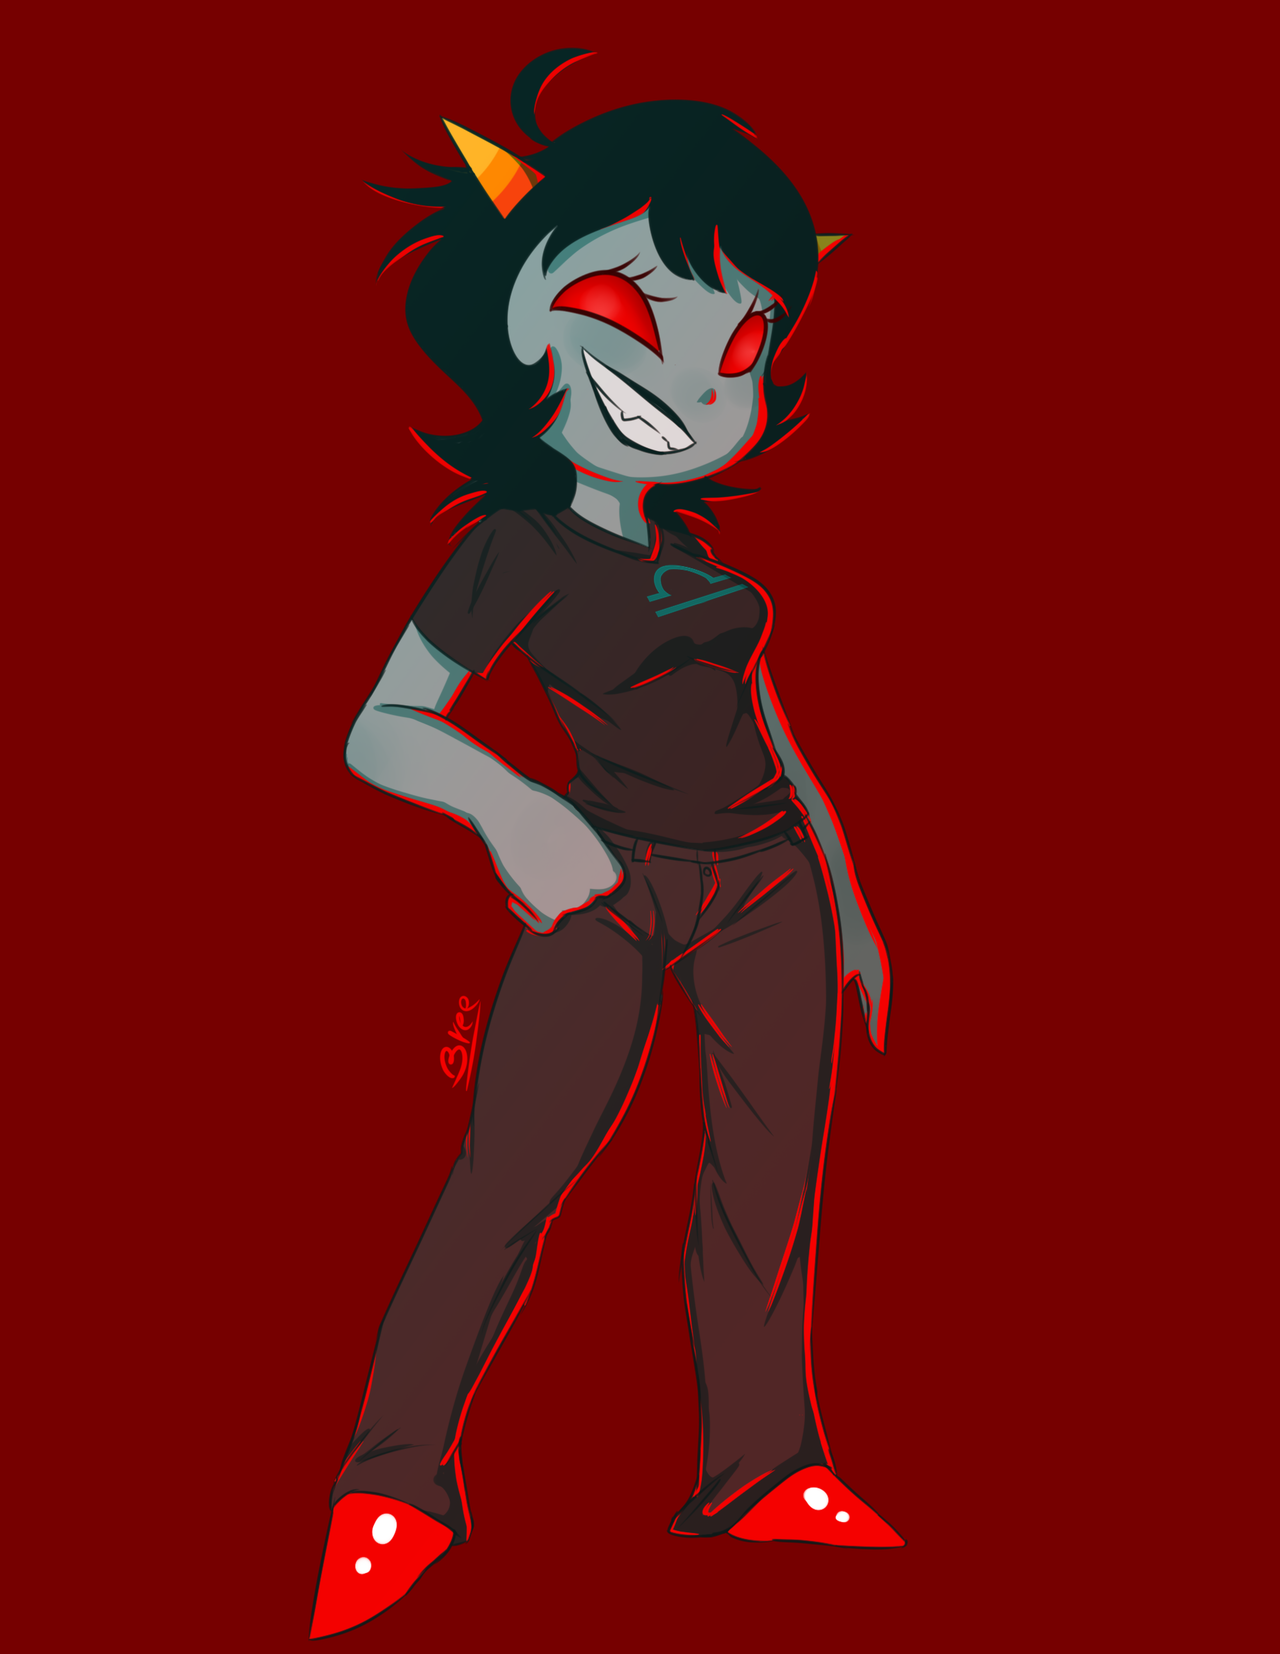 scrupulouslyelusive:
“ thebreeoche:
“Whoops my hand slipped and I drew a wife.
”
Tenouttaten actually a masterpiece - Would Terezi Again :oksignbutwithagrayhand:
”